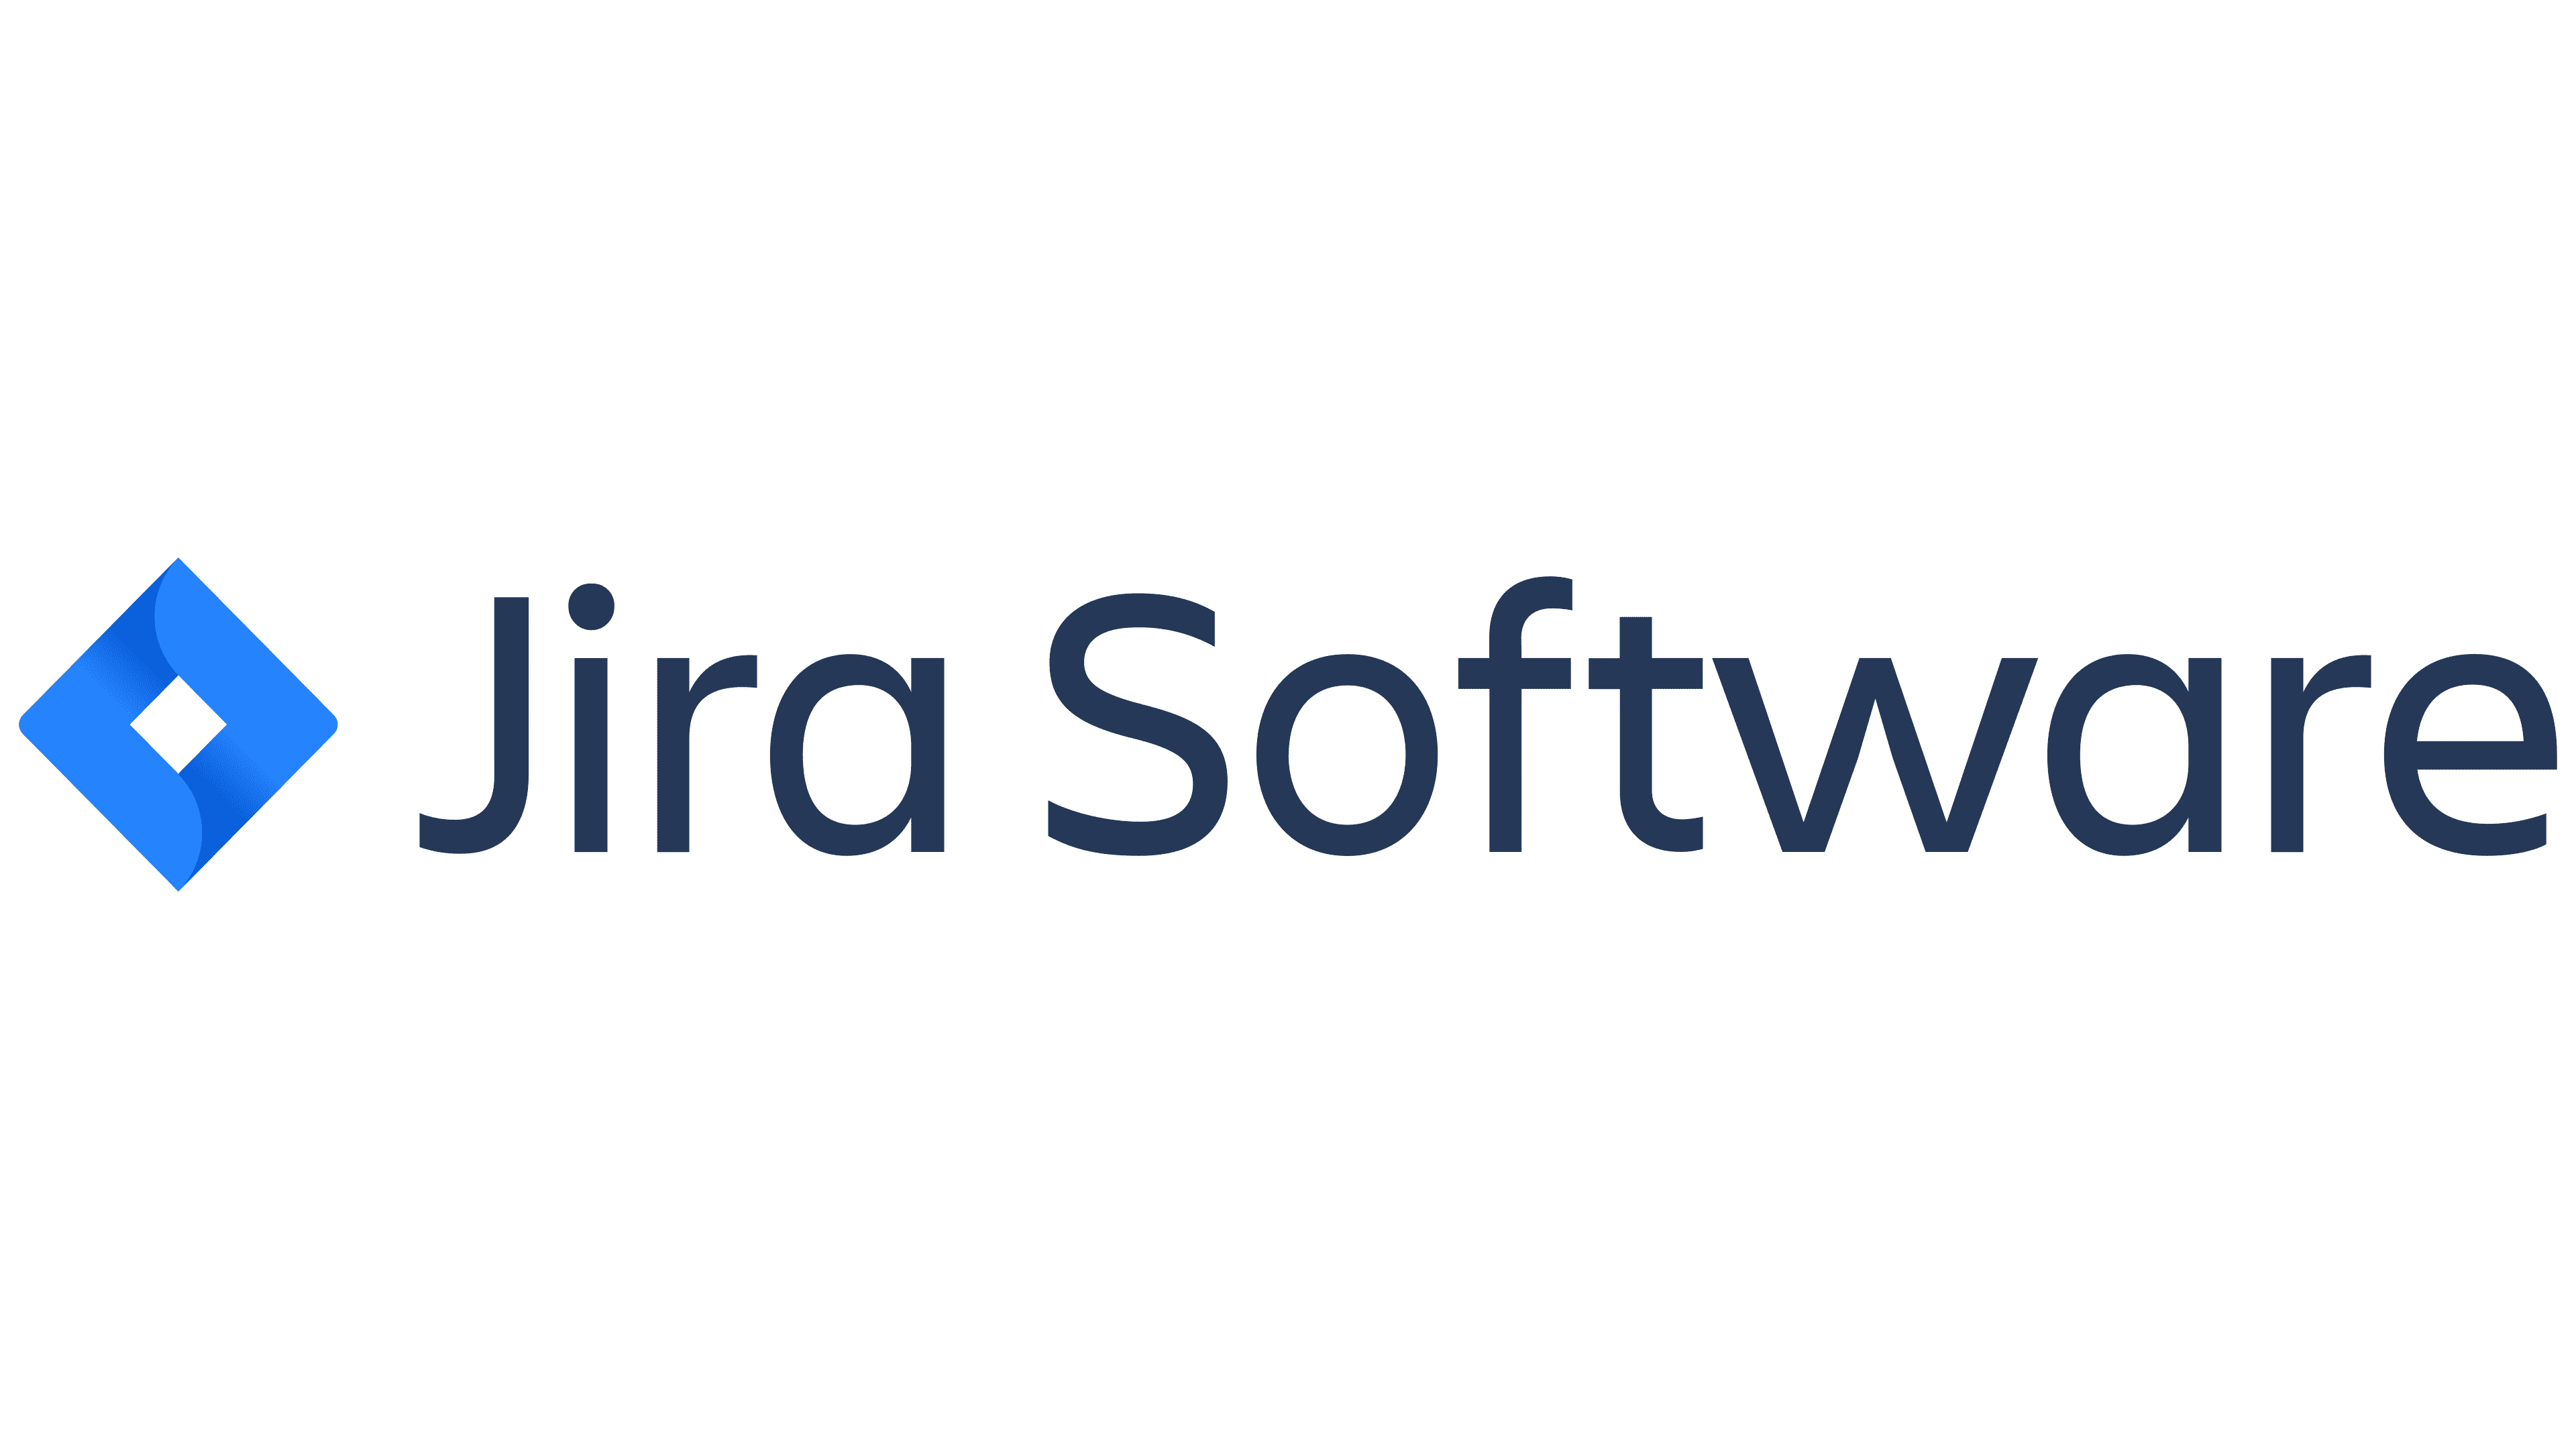 The Jira software official logo